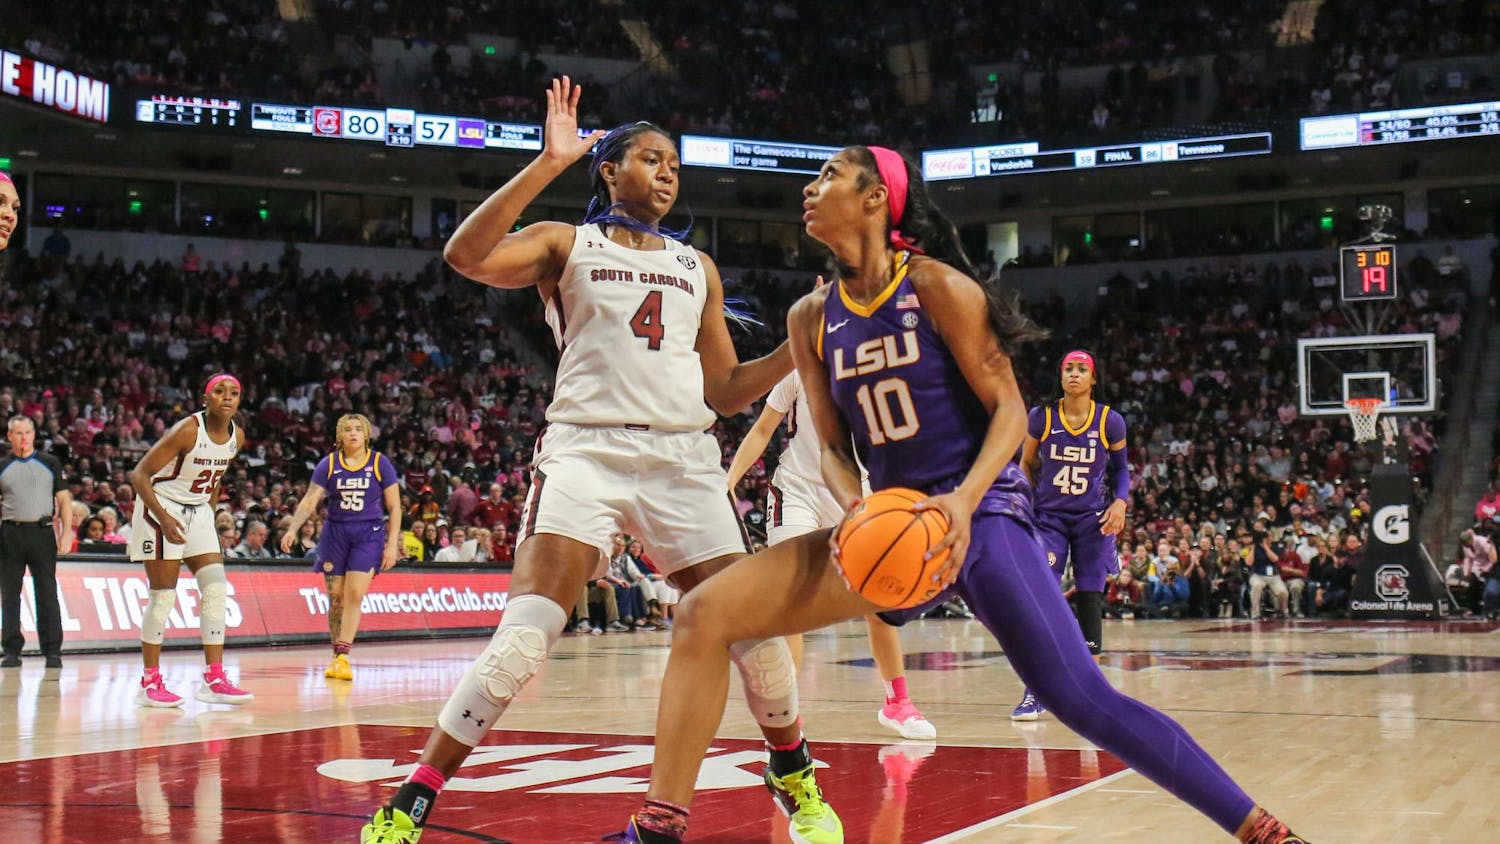 FILE - Senior forward Aliyah Boston guards LSU’s Angel Reese during South Carolina’s game against LSU at Colonial Life Arena on Feb. 12, 2023. The Gamecocks beat the Tigers 88-64.